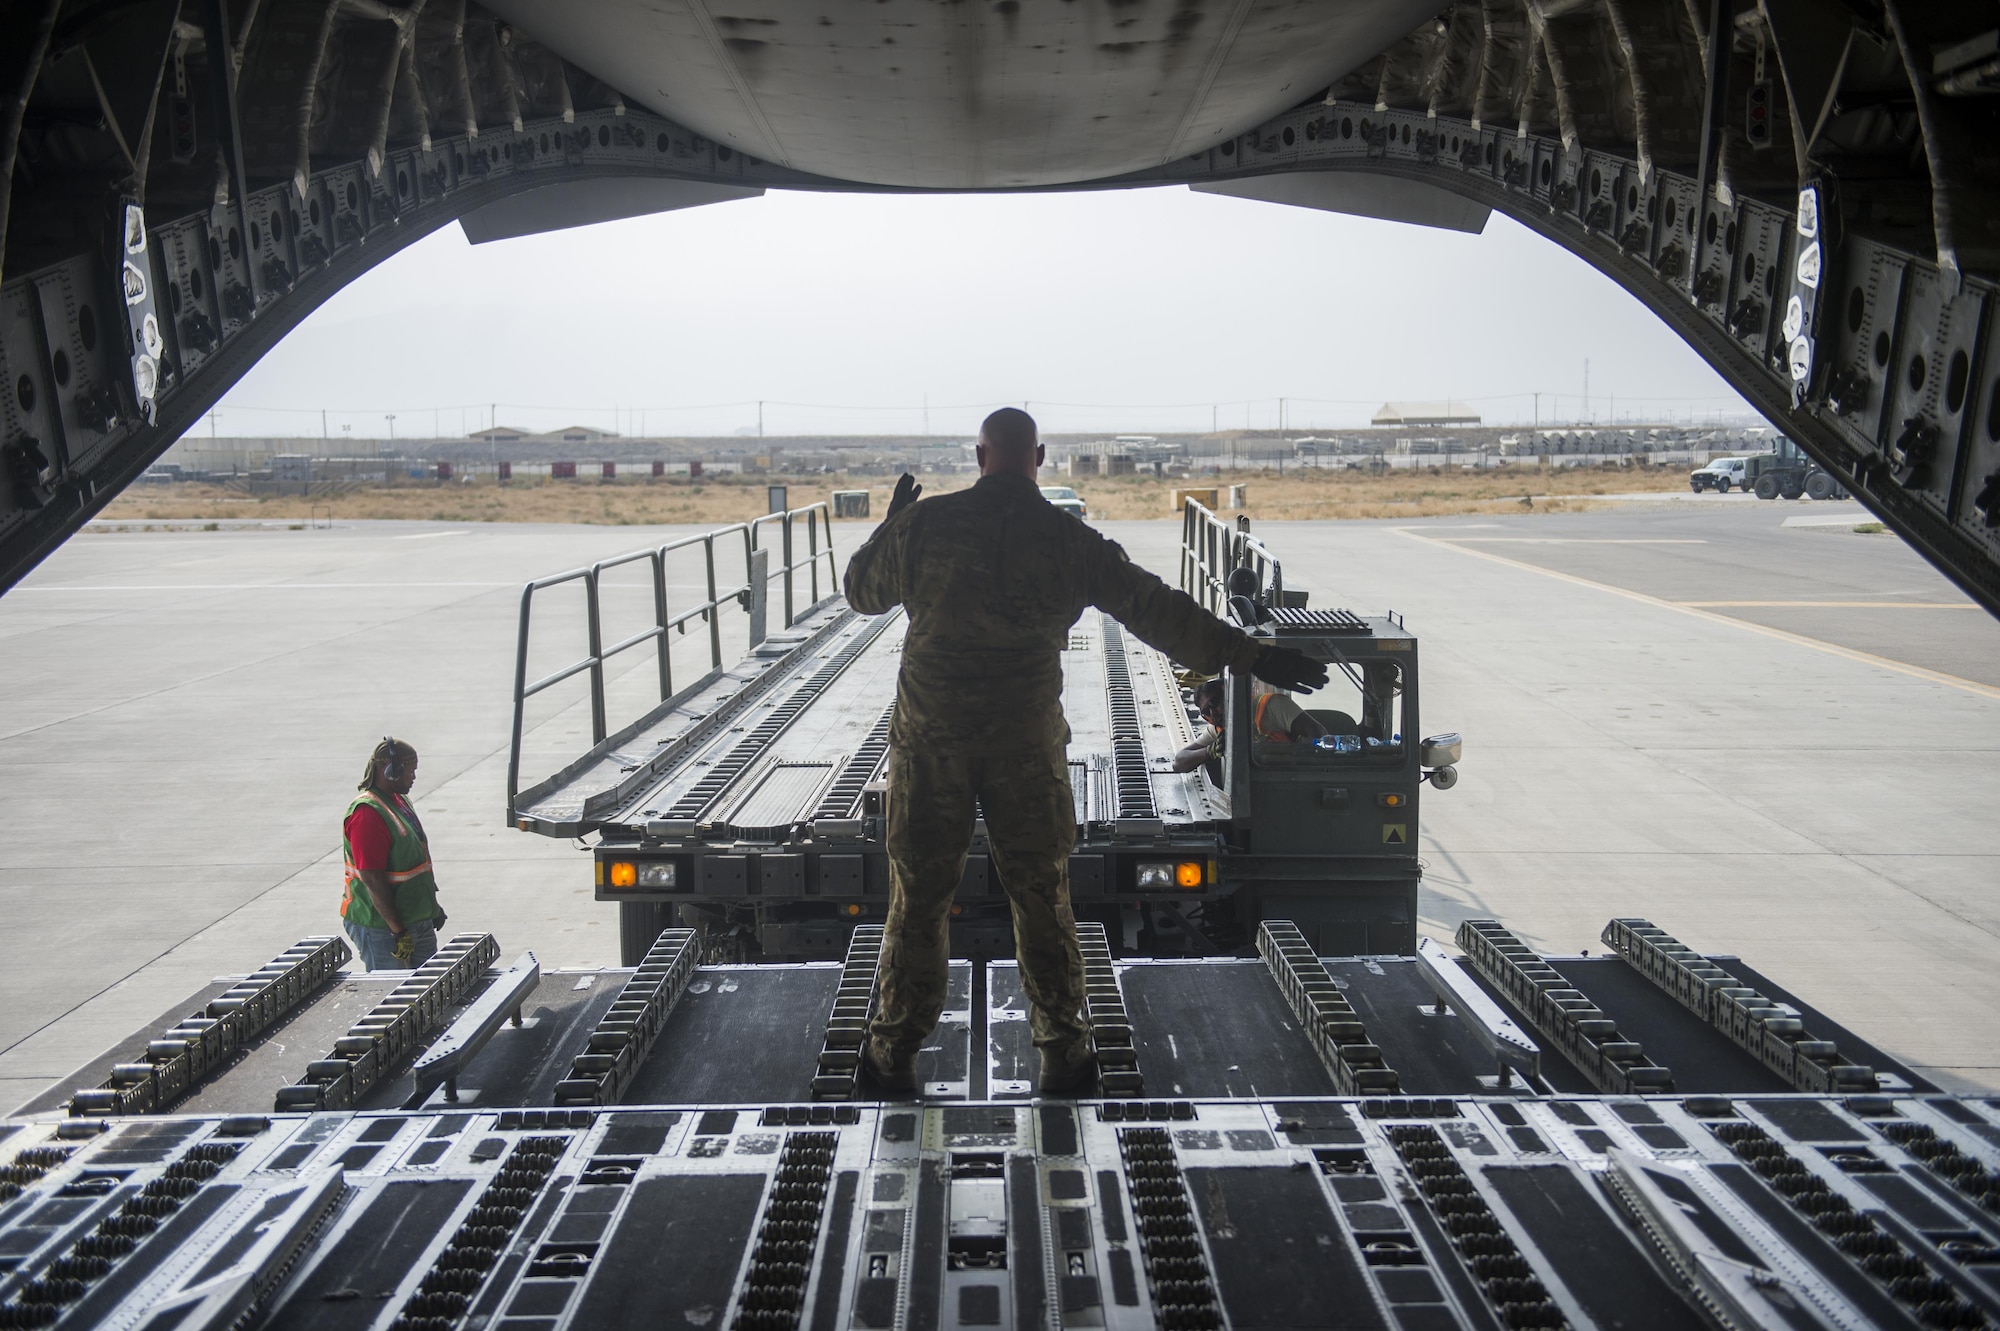 A U.S. Air Force C-17 Globemaster III loadmaster directs a loading truck during a transport mission in support of Operation Freedom Sentinel in Southwest Asia Sept. 30, 2016. The C-17 is the newest most flexible cargo aircraft to enter the airlift force. The C-17 is capable of rapid strategic delivery of troops and all types of cargo to main operating bases or directly to forward bases in the deployment area. (U.S. Air Force photo by Staff Sgt. Douglas Ellis/Released)